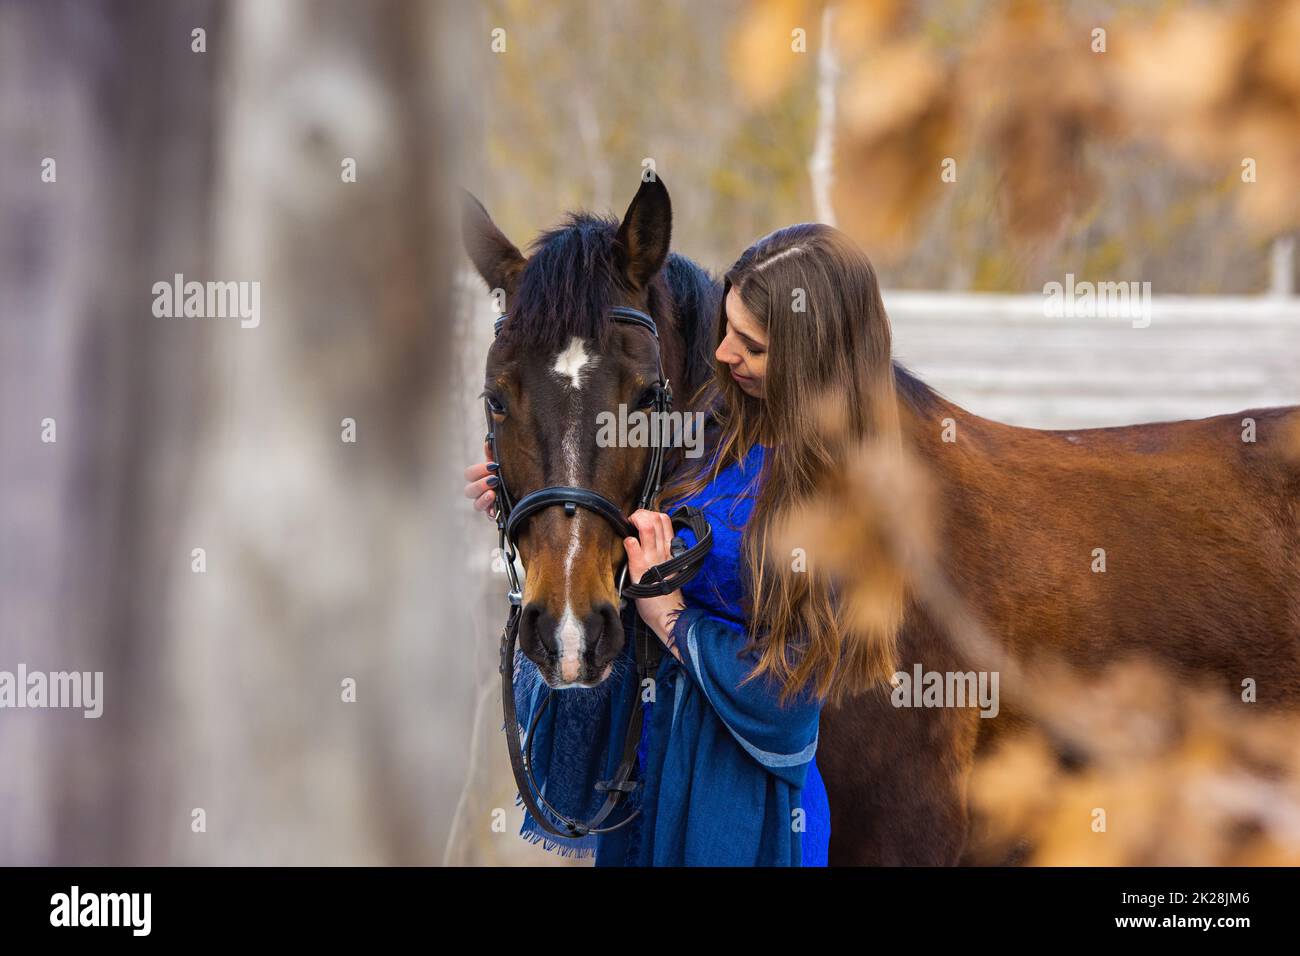 Touching portrait of a girl in a blue dress with a horse Stock Photo